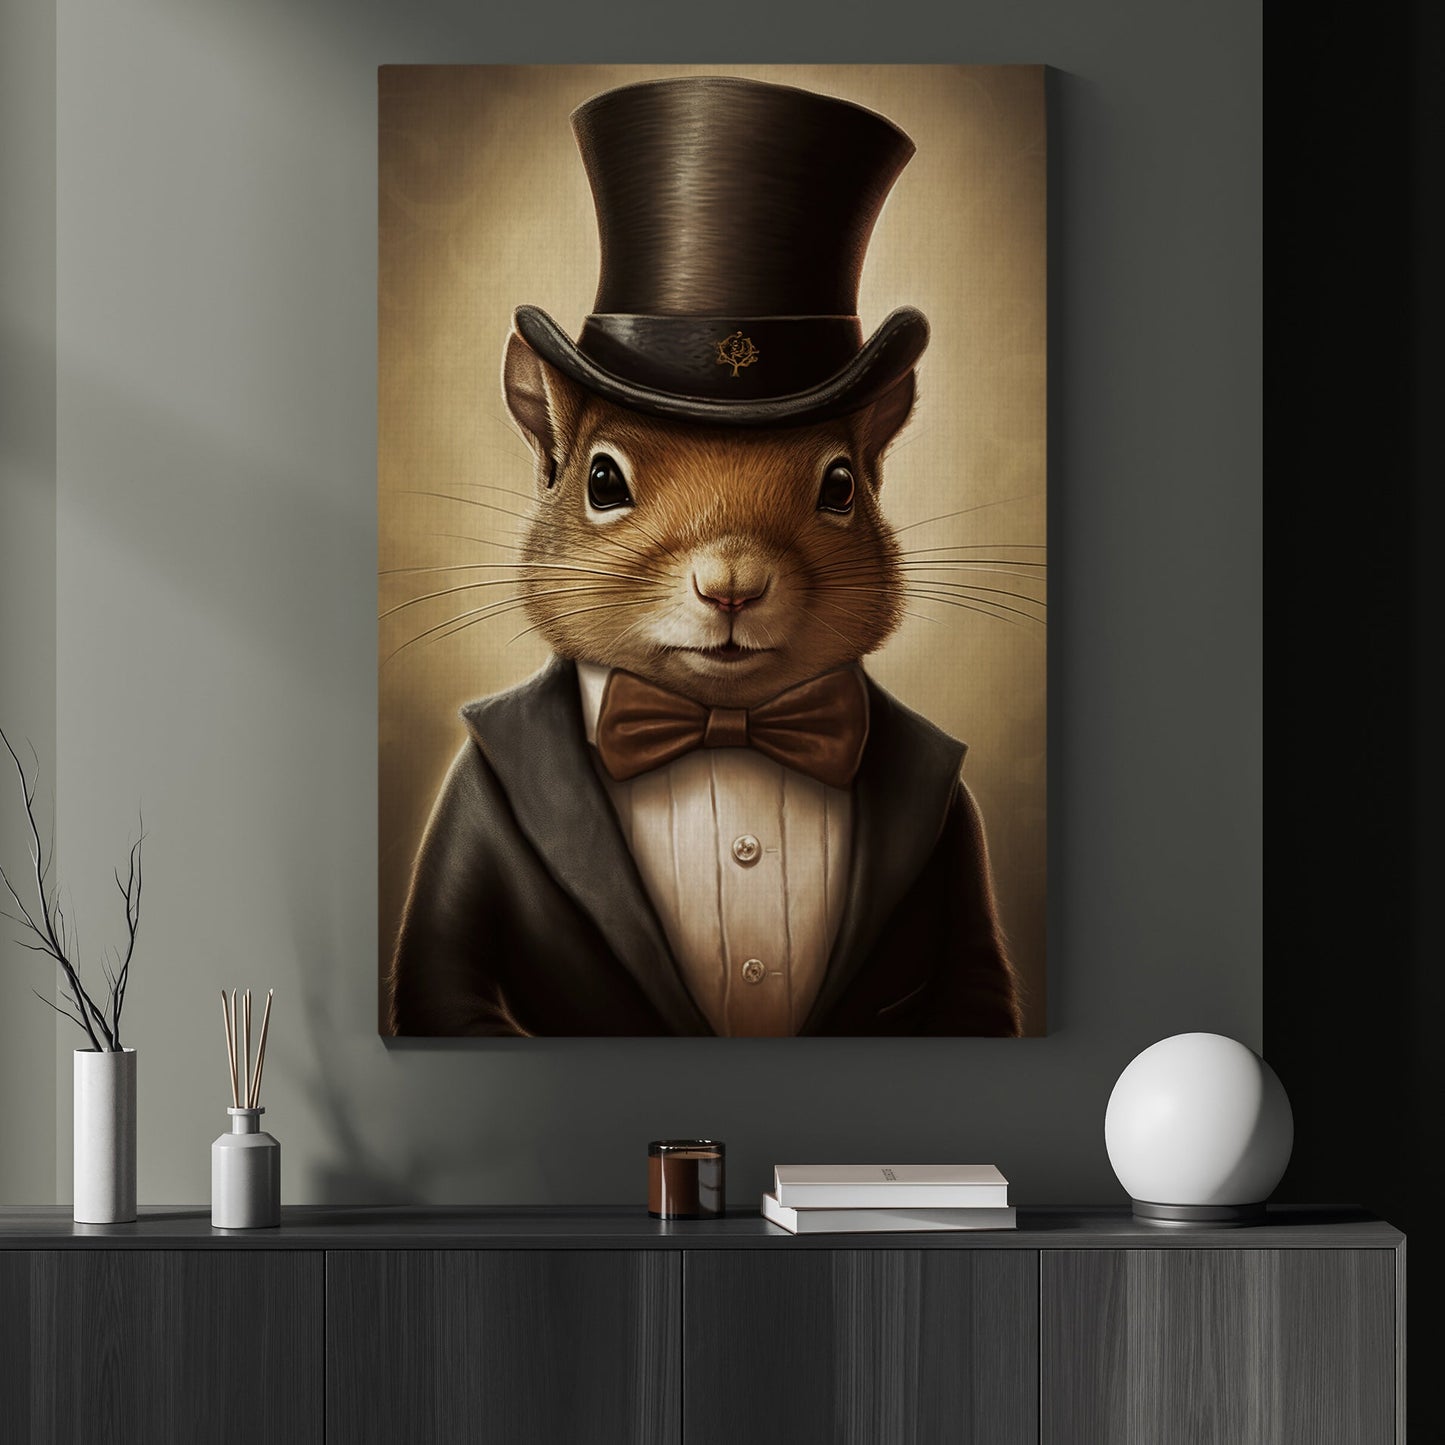 Squirrels In Victorian Suit, Victorian Squirrels Canvas Painting, Victorian Animal Wall Art Decor, Poster Gift For Squirrel Lovers